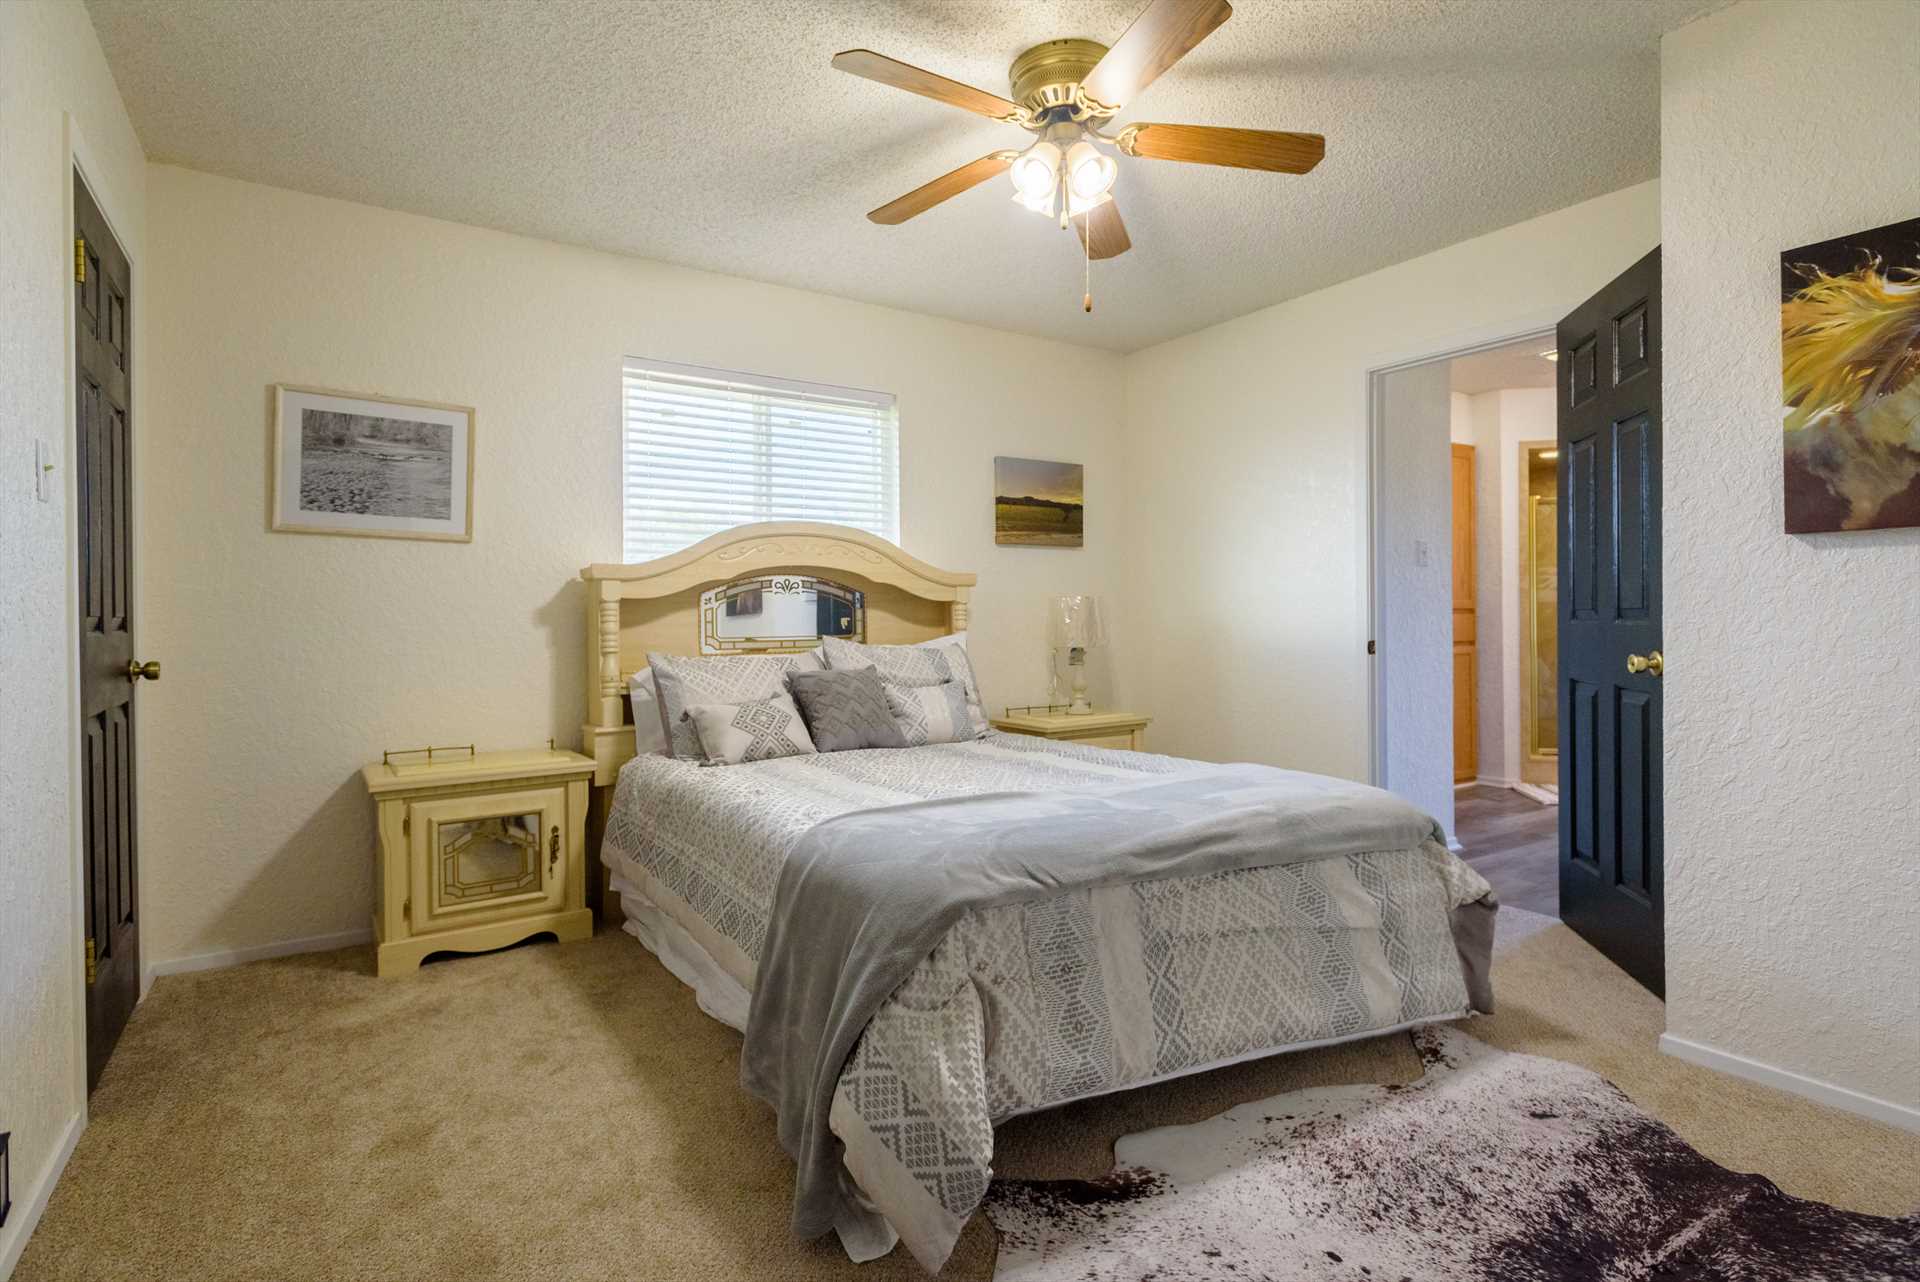                                                 A plush and comfy queen-sized bed provides sweet and private slumber for up to two people in the second bedroom.